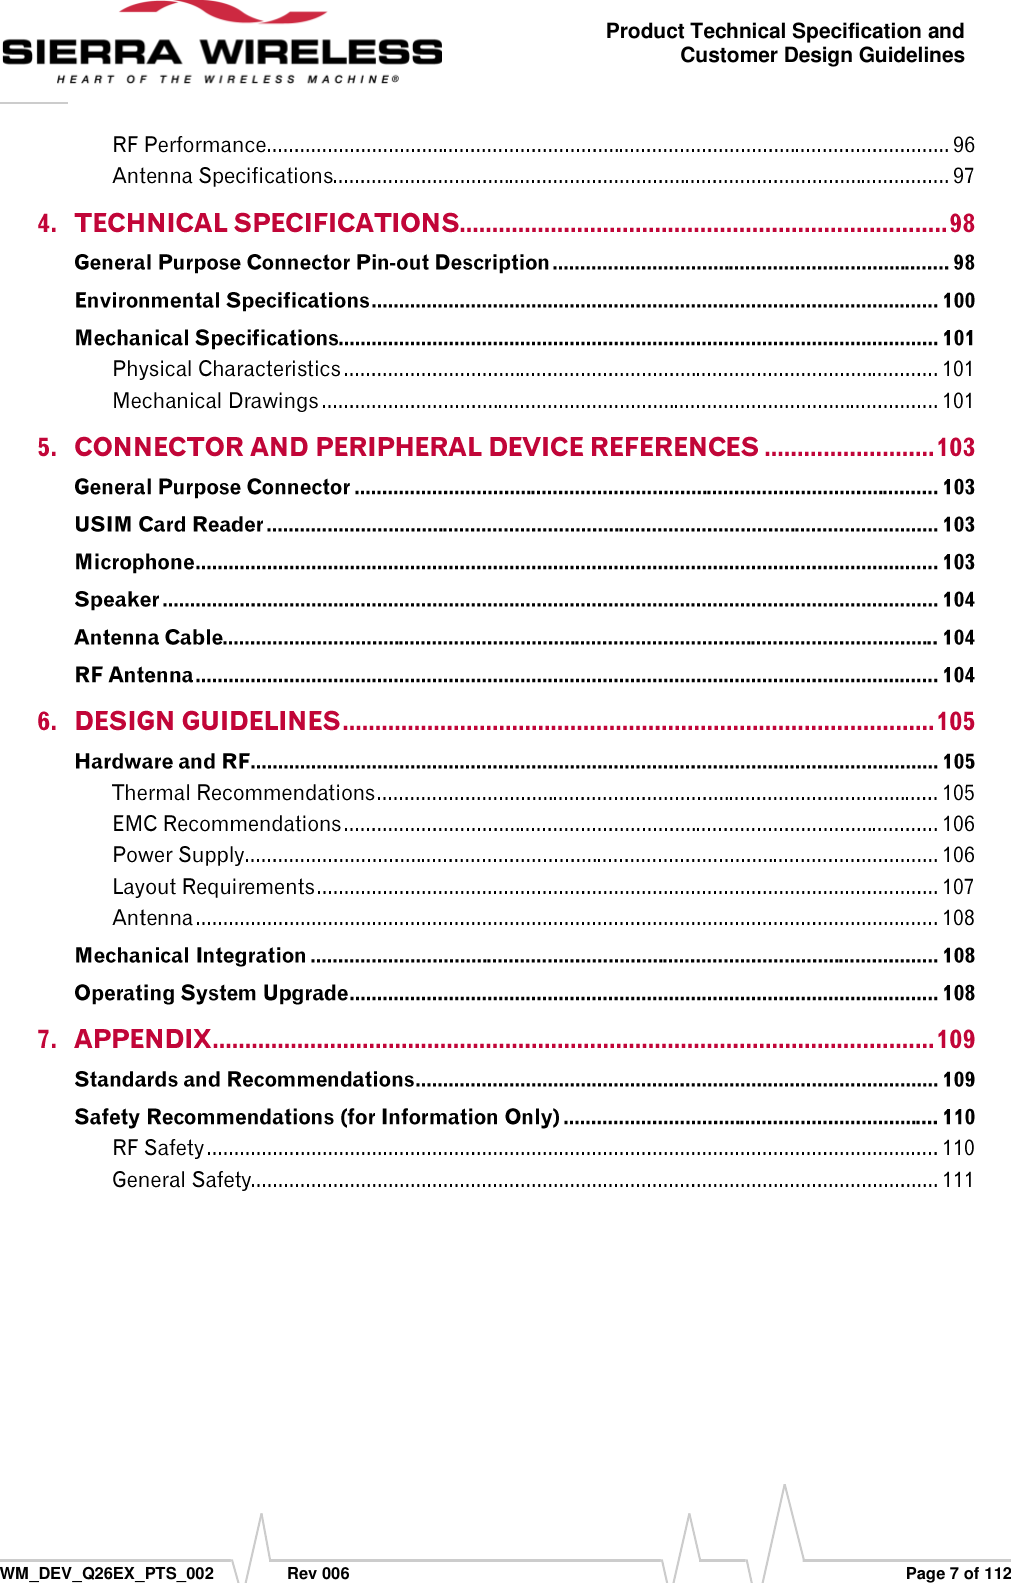      WM_DEV_Q26EX_PTS_002  Rev 006  Page 7 of 112 Product Technical Specification and Customer Design Guidelines                                       